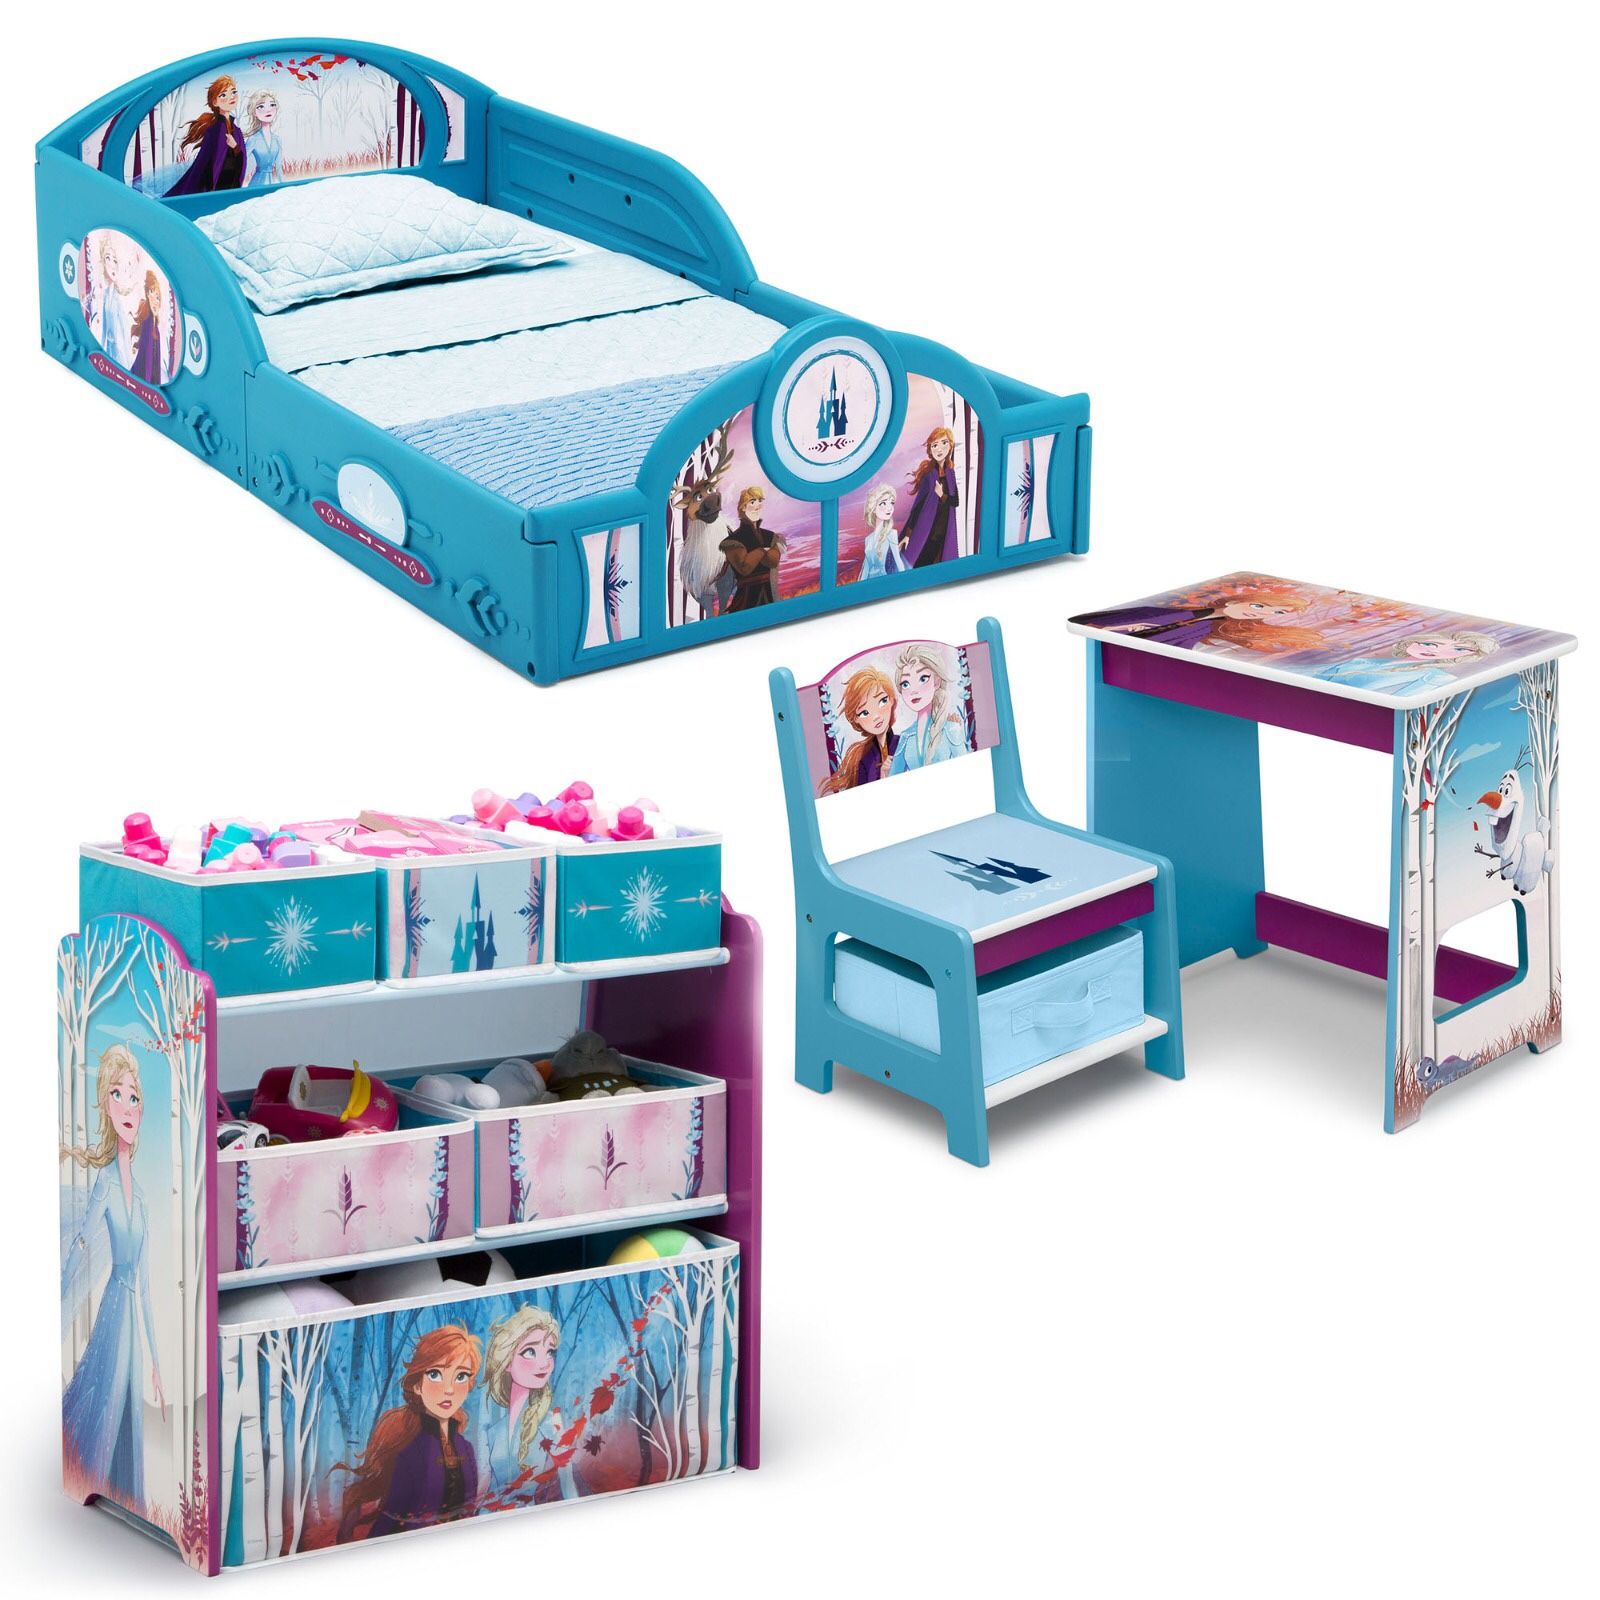 New Disney Frozen II 4-Piece Room-in-a-Box Bedroom Set by Delta Children - Includes Sleep & Play Toddler Bed, 6 Bin Design & Store Toy Organizer and D